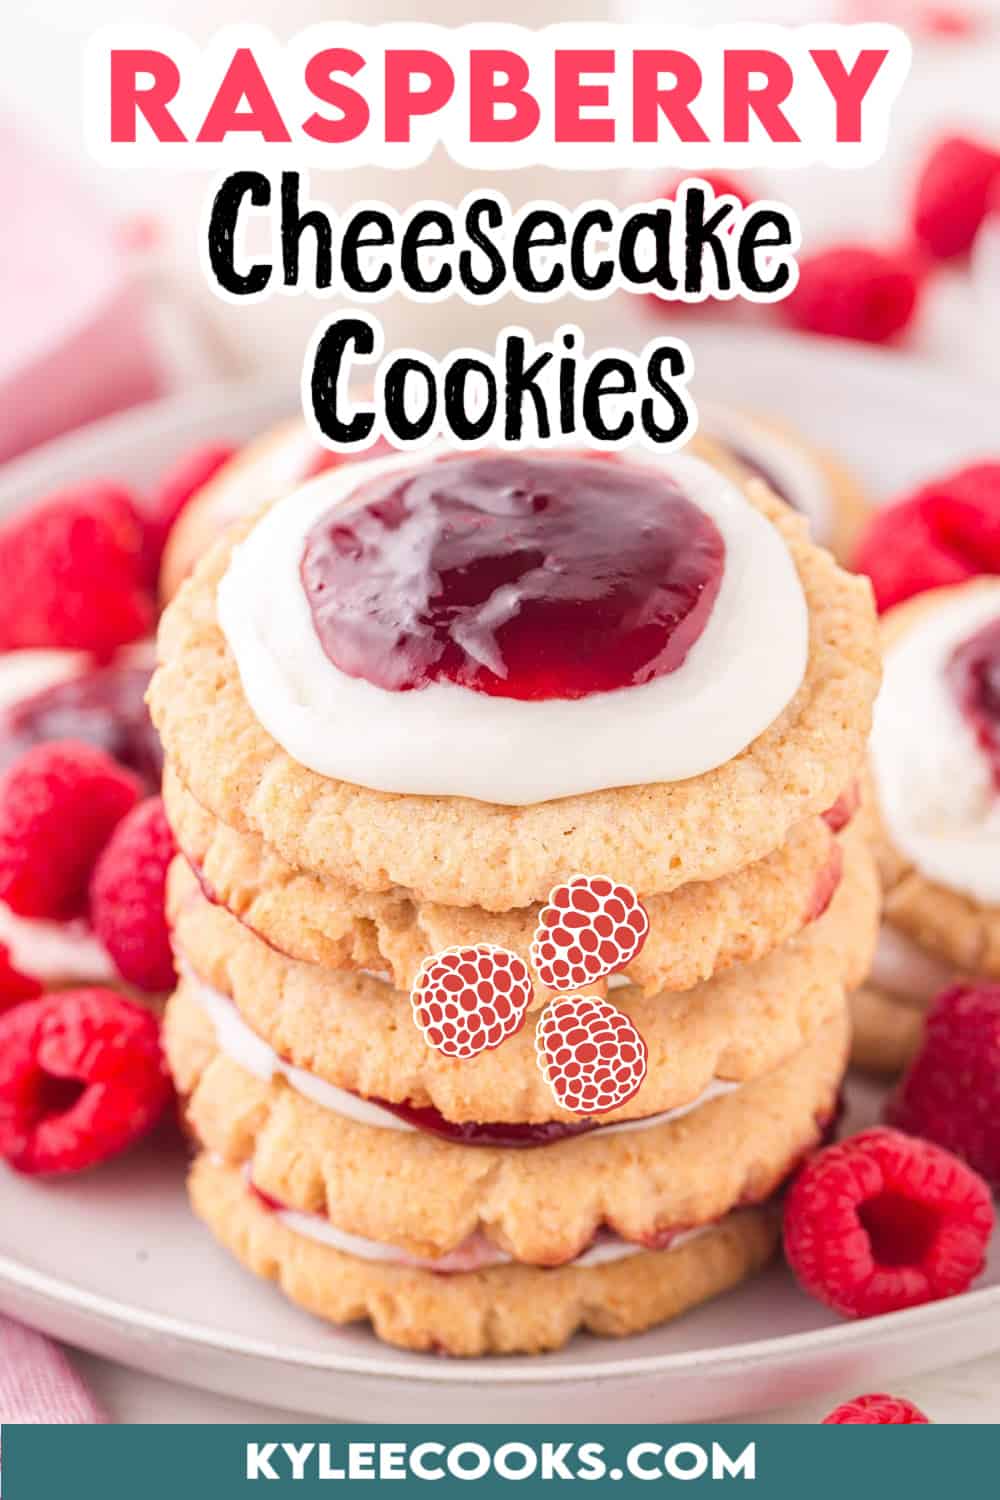 raspberry cheesecake cookies stacked on a plate with raspberries.